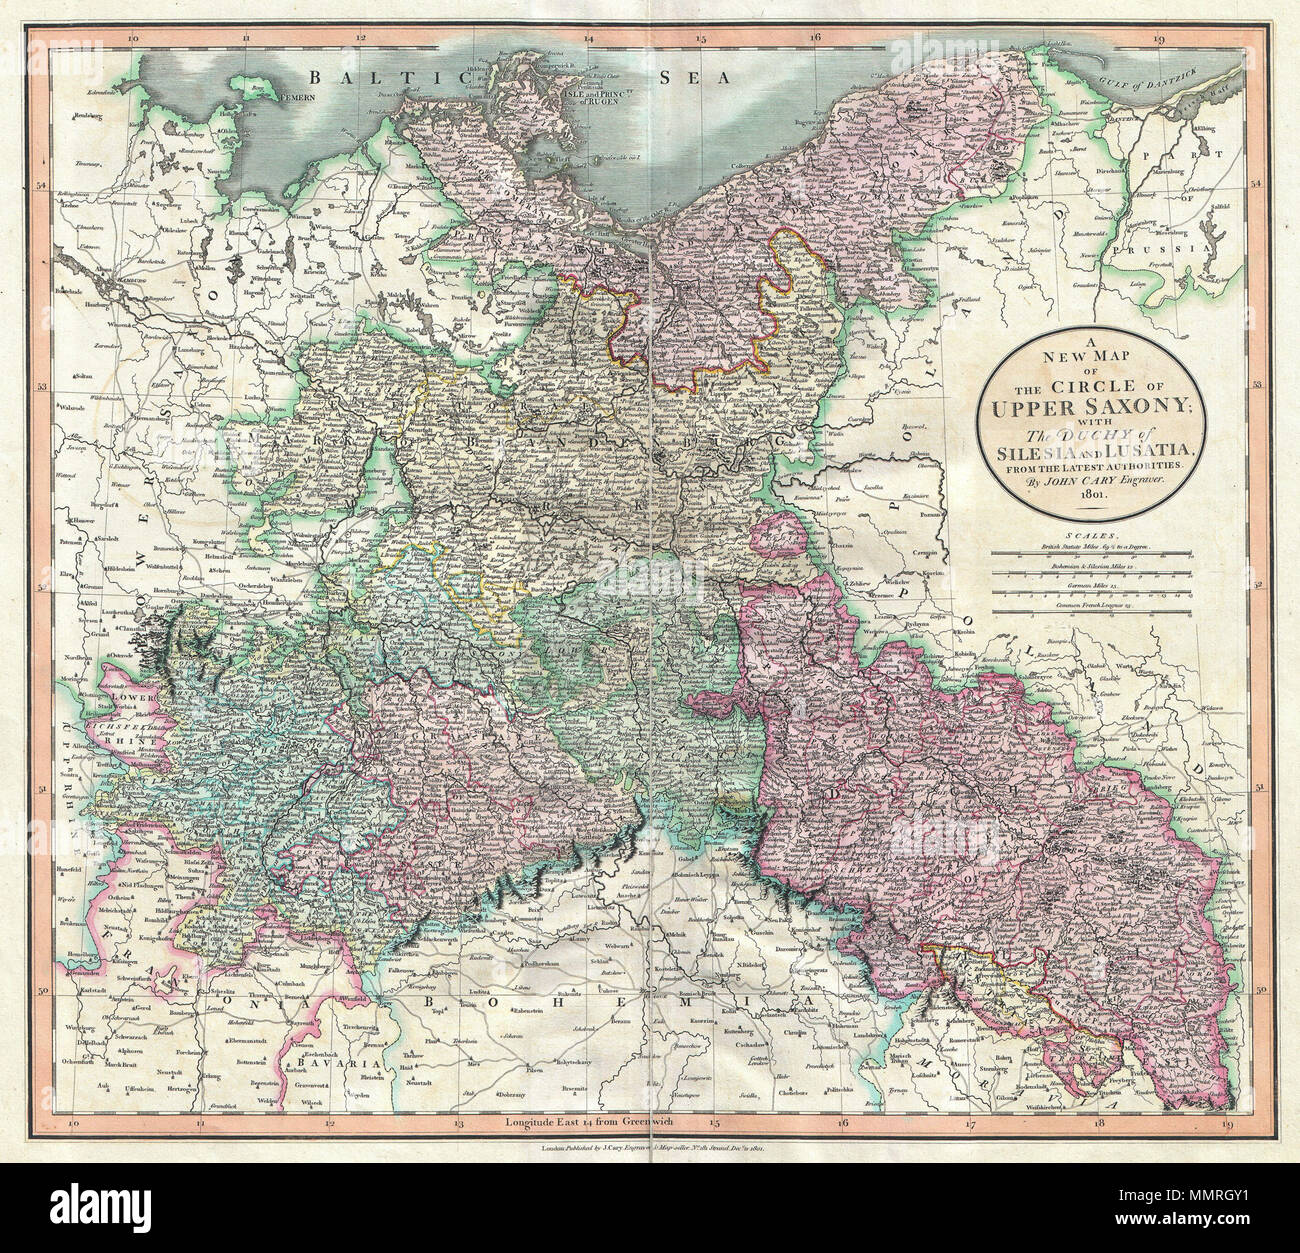 . English: An attractive example of John Cary’s 1801 map of Upper Saxony, Germany. Covers from the Baltic Sea south to Franconia, Bavaria, Bohemia and Moravia. Extends eastward as far as Poland. Includes the Duchy of Silesia, the Duchy of Lusatia, Prussian Pomerania, Electoral Mark of Brandenburg, and the Margraviate of Meissen. Notes the cities of Berlin, Prague, Dresden, and Leipzig among many others. Highly detailed with color coding according to region. Shows forests, cities, palaces, forts, roads and rivers. All in all, one of the most interesting and attractive atlas maps of Upper Saxony Stock Photo